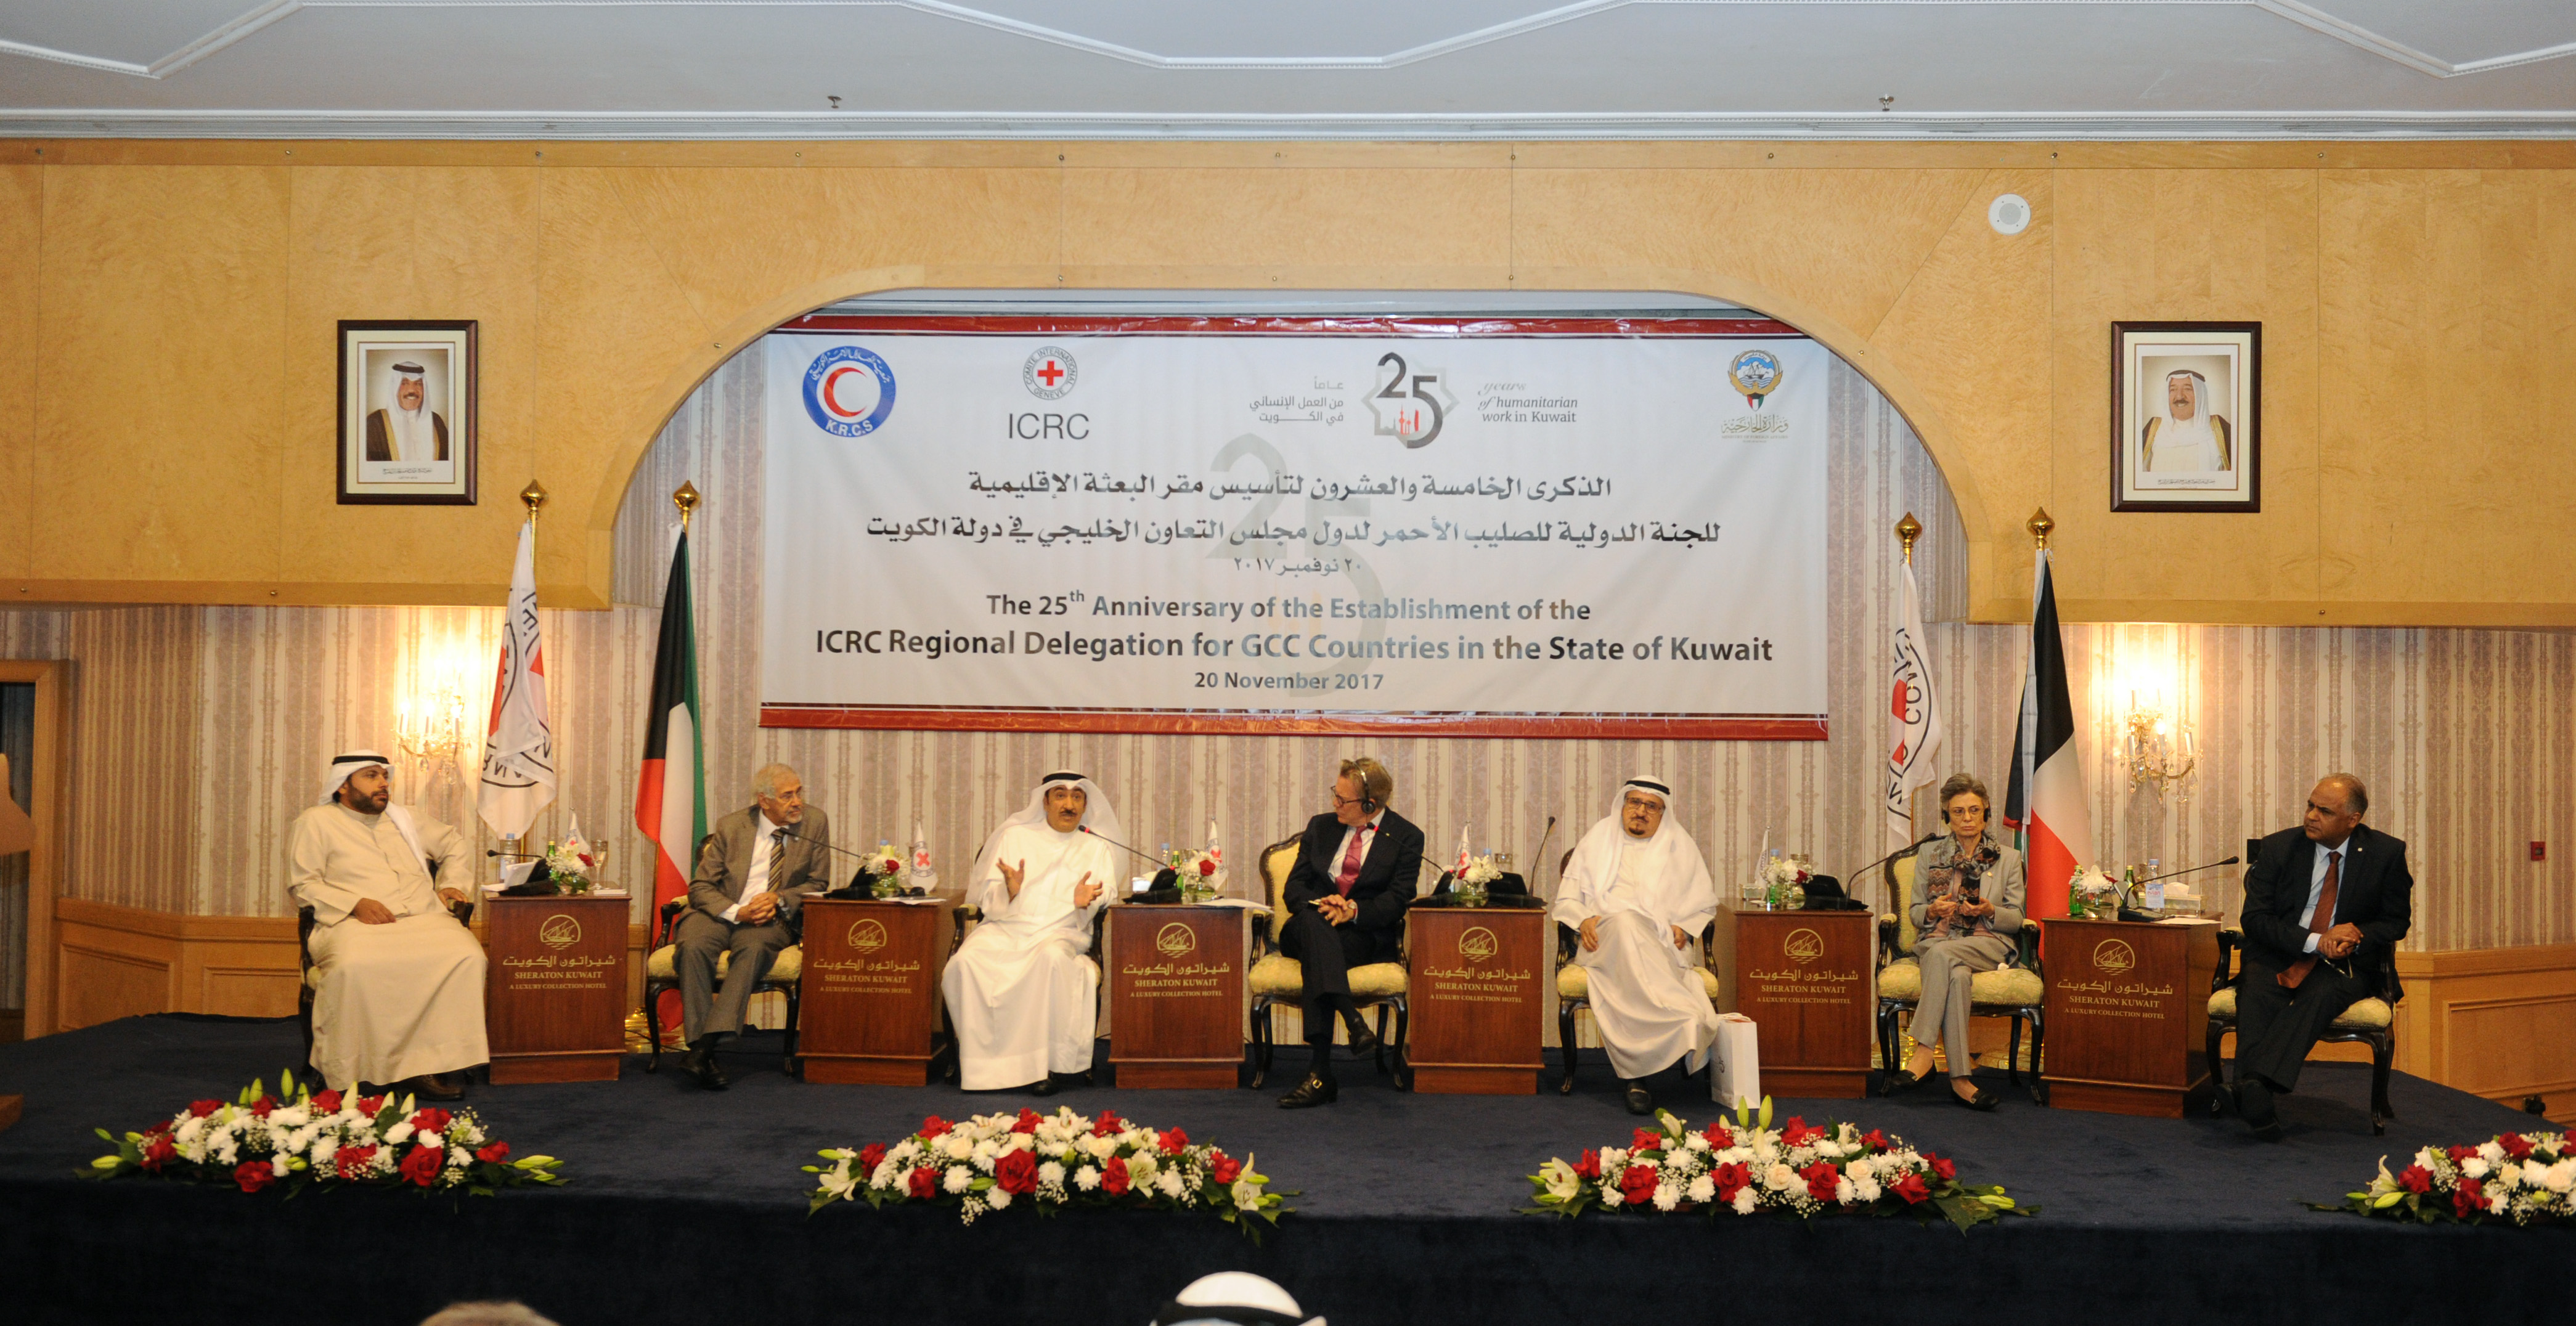 The International Committee of the Red Cross (ICRC) celebrating the 25th anniversary of their presence in Kuwait